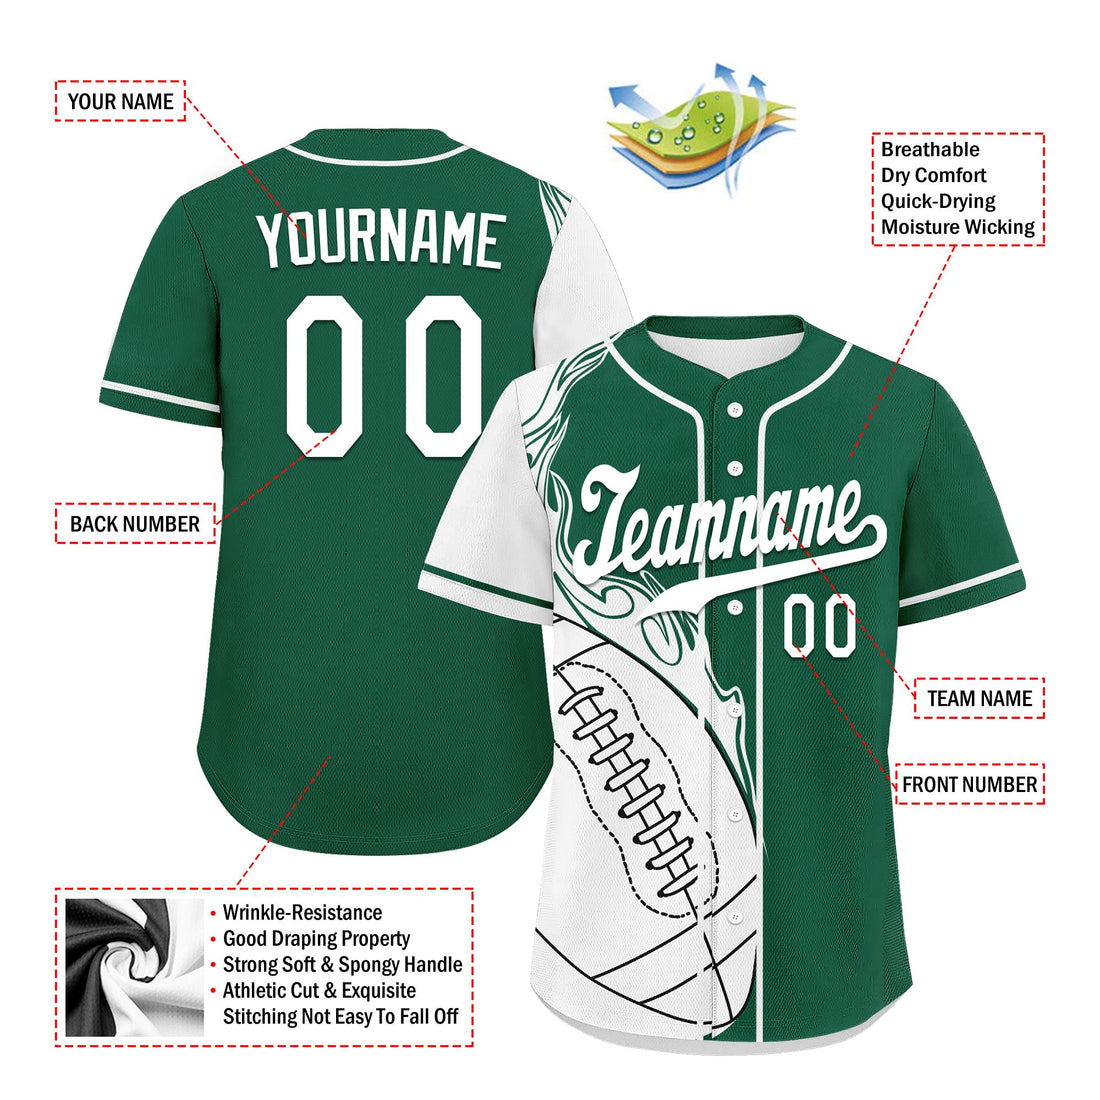 Custom Green White Classic Style Personalized Authentic Baseball Jersey UN002-D0b0a00-b0